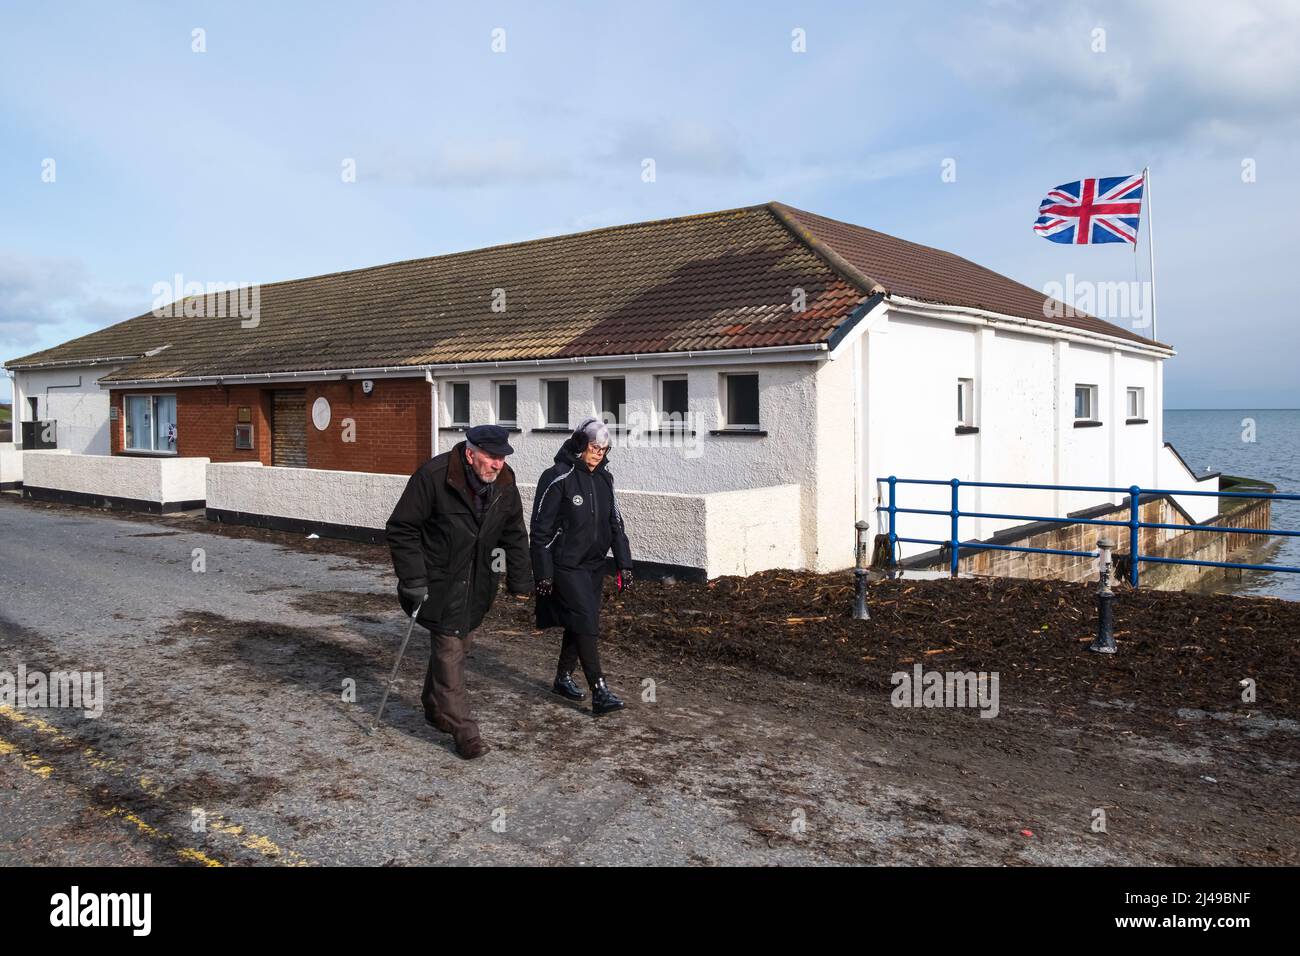 Glasgow Rangers Supporters club along the shore at Whitehead in County Antrim, Northern Ireland. Stock Photo